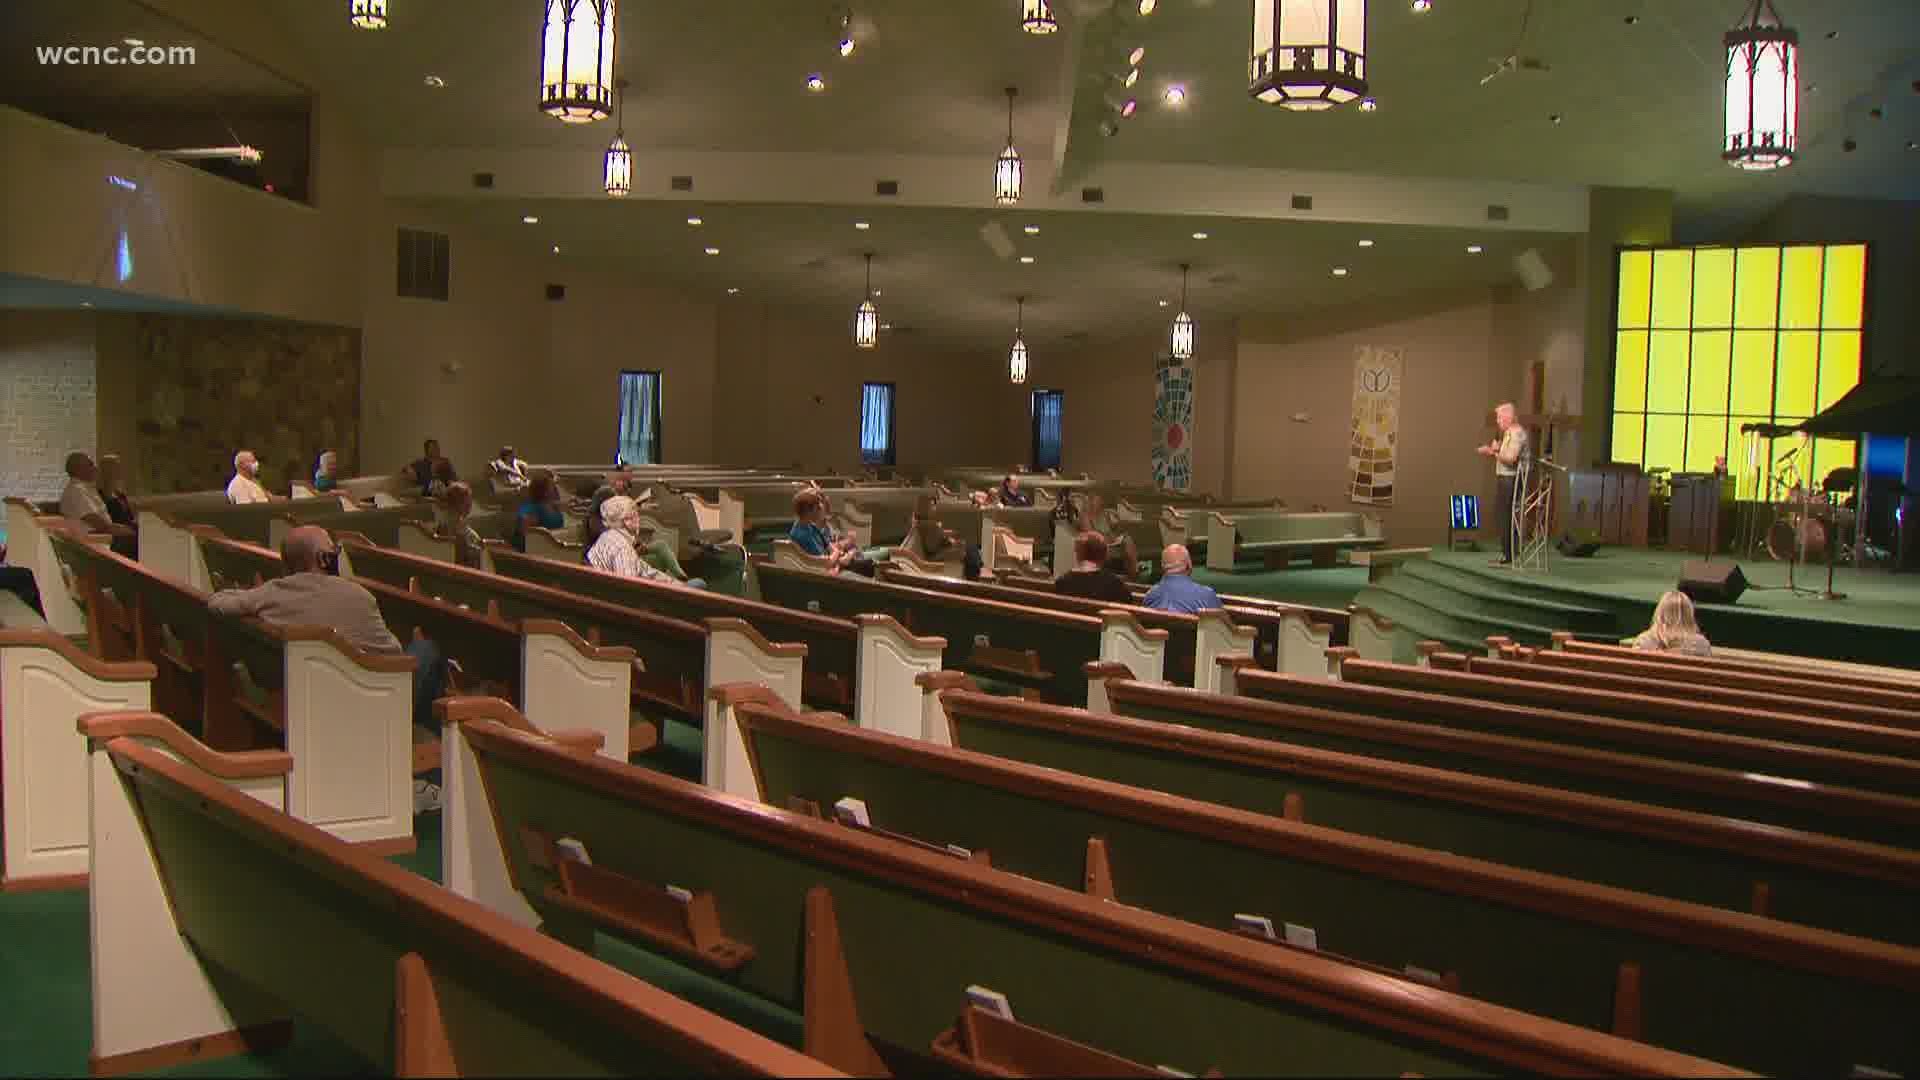 Churches in N.C. now have the option to hold services inside or outside. Harvest Church Charlotte takes advantage of the reopening during services on Sunday.